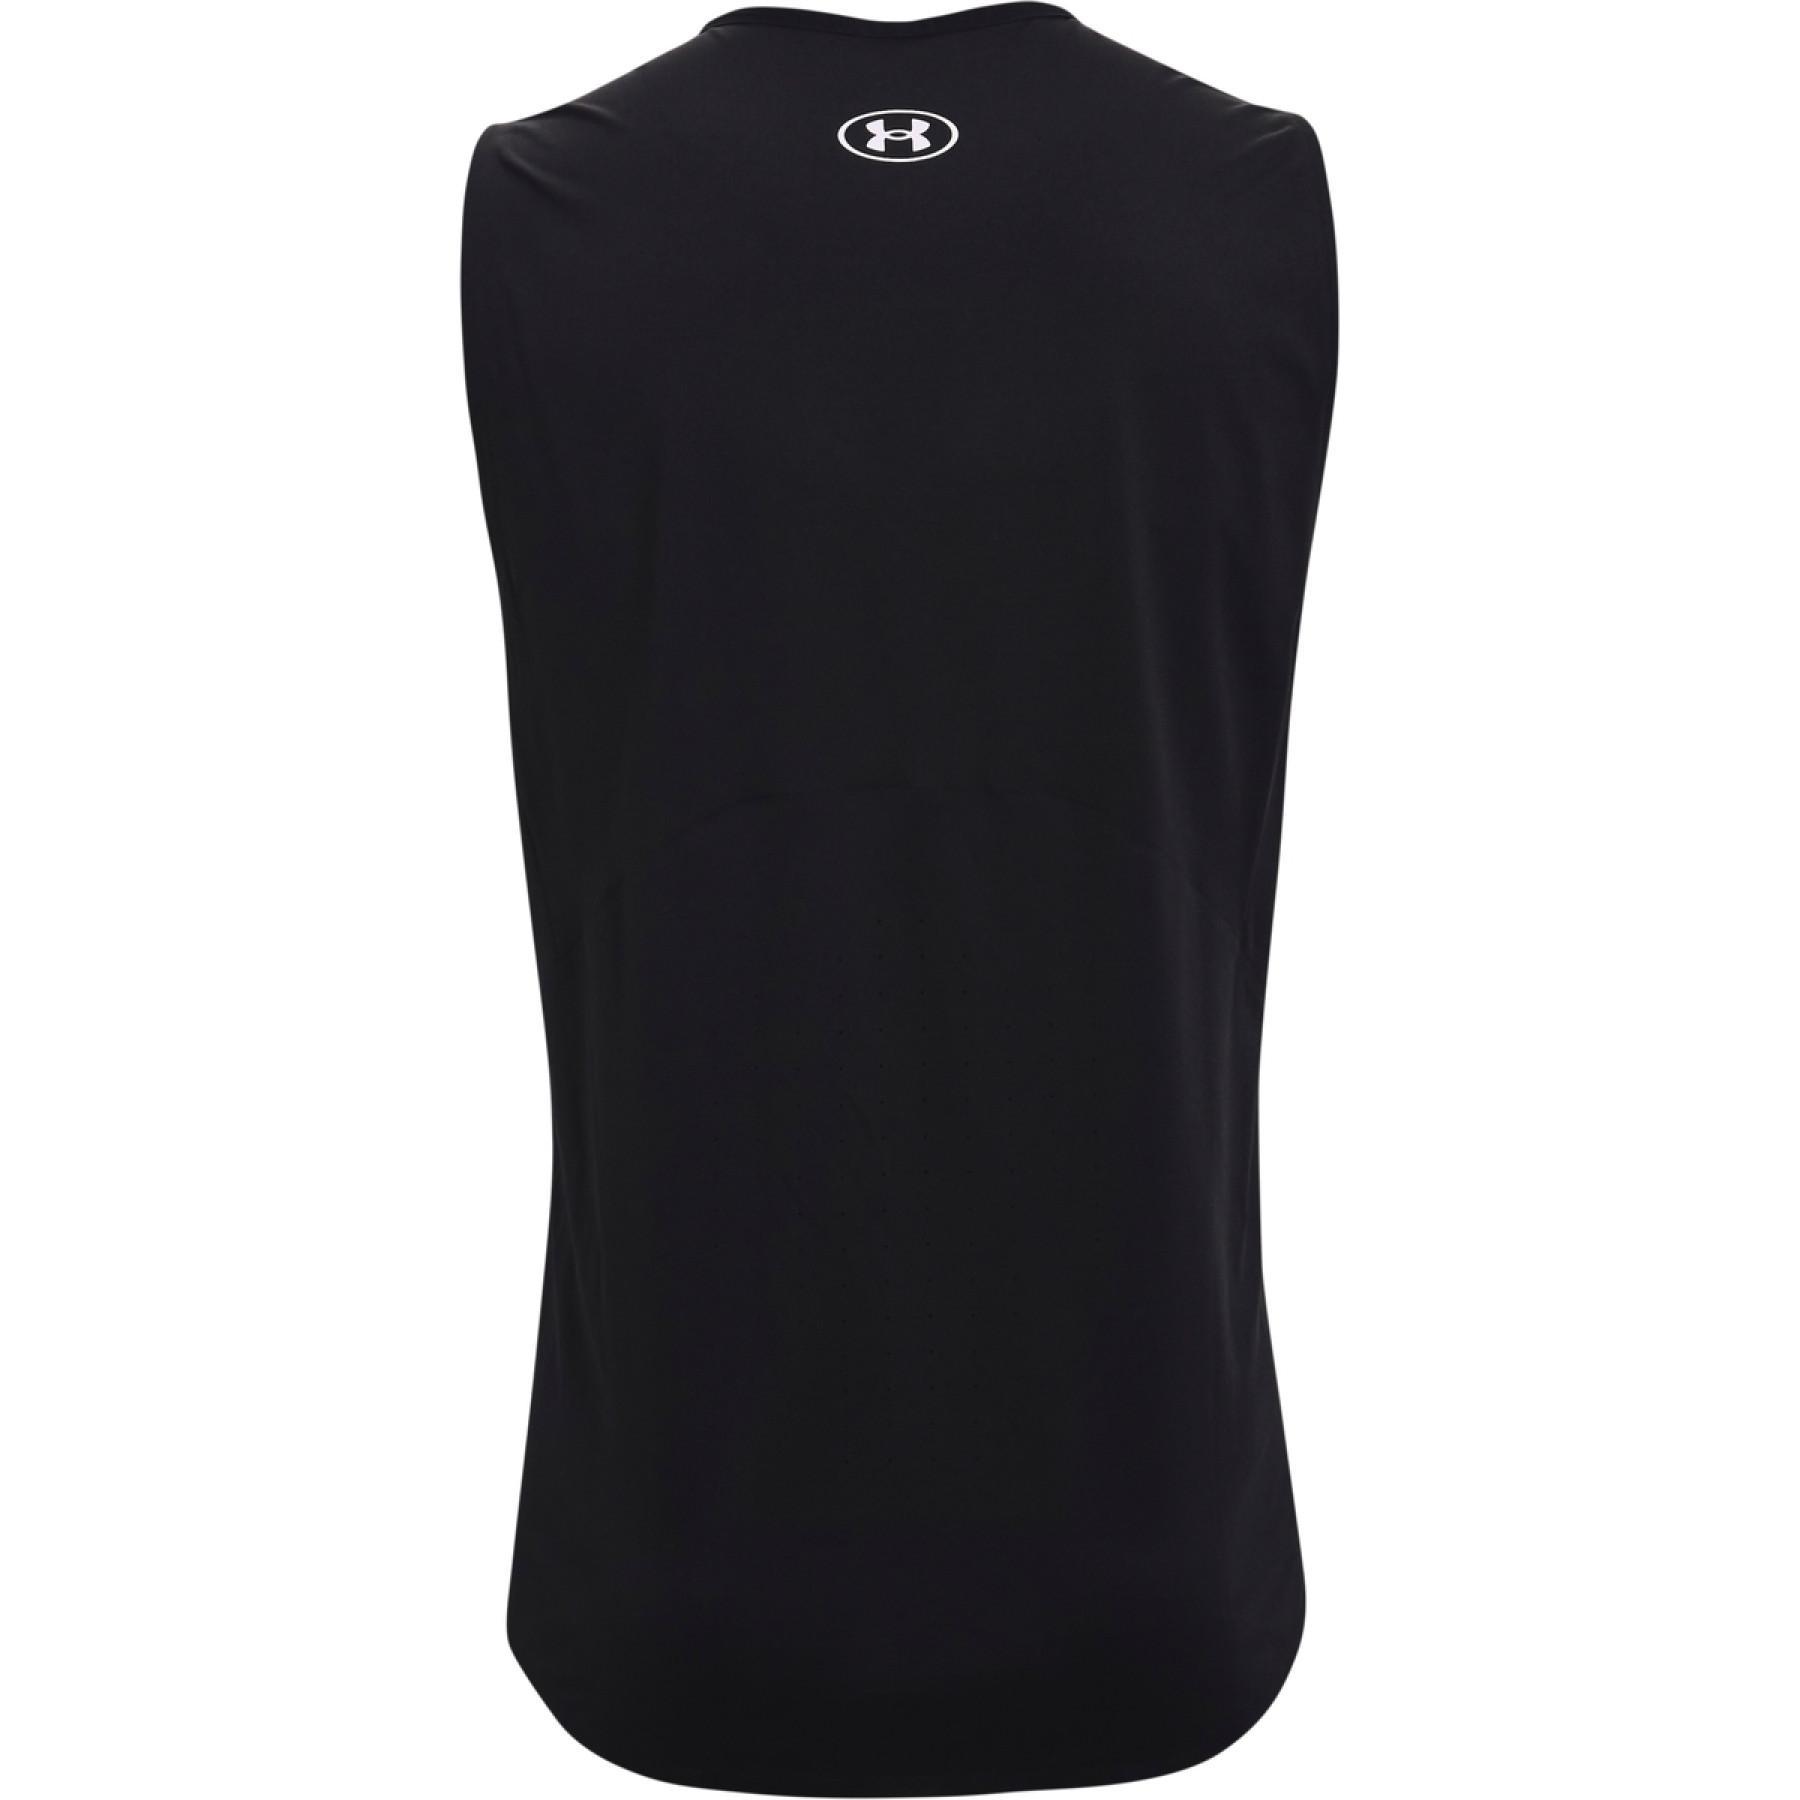 T-shirt Under Armour sans manches perforé iso-chill